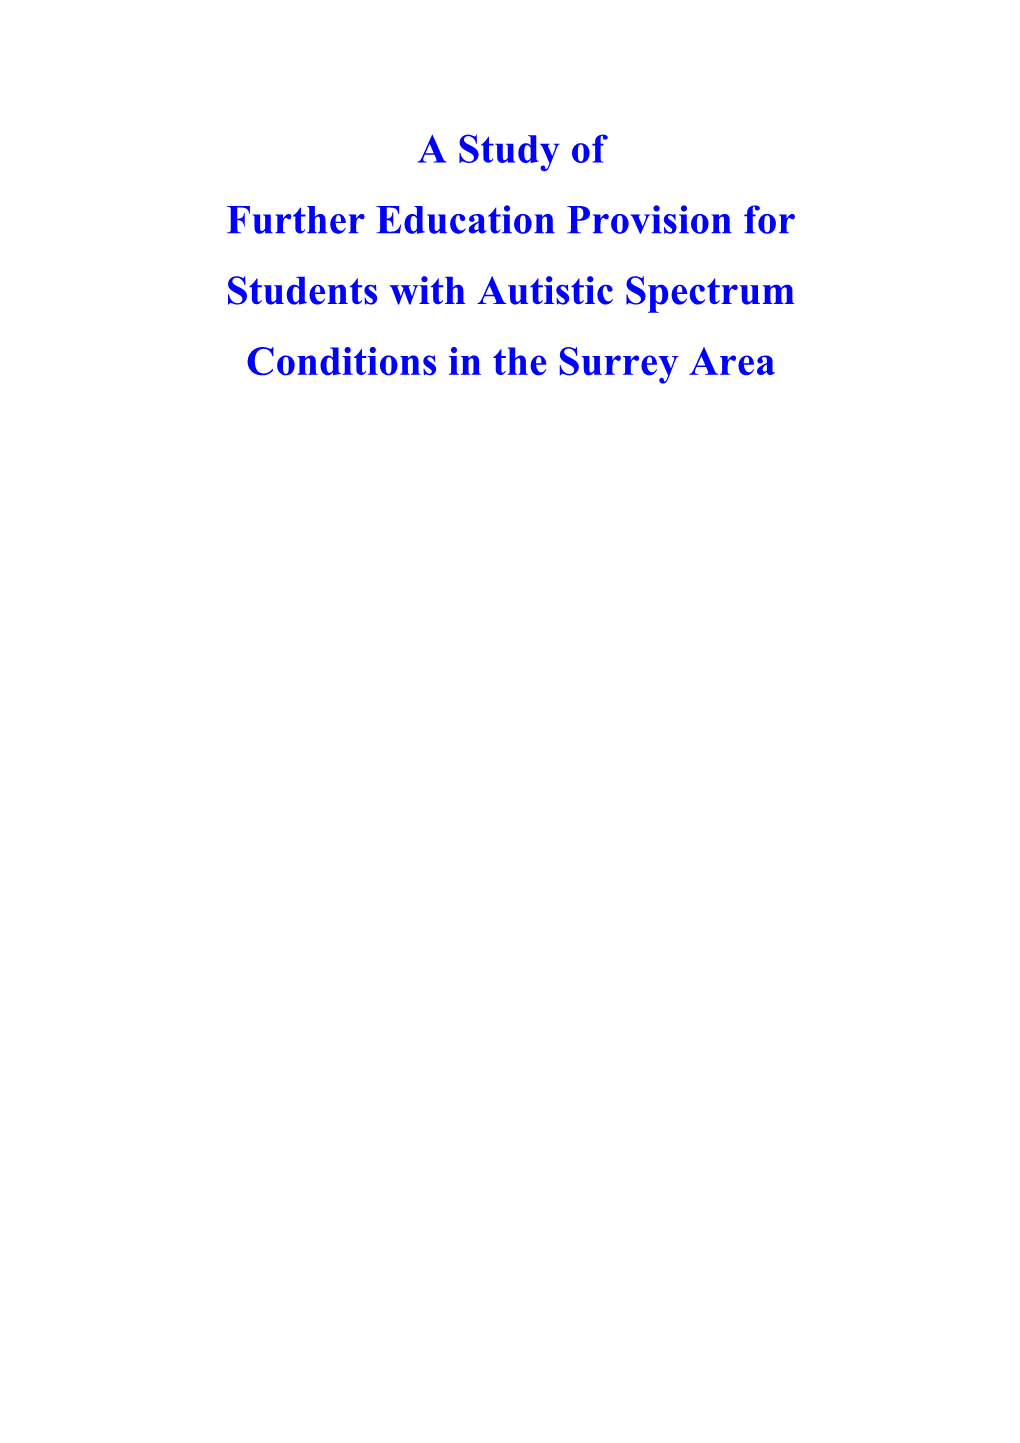 A Study of Further Education Provision for Young Adults with an Autistic Spectrum Condition